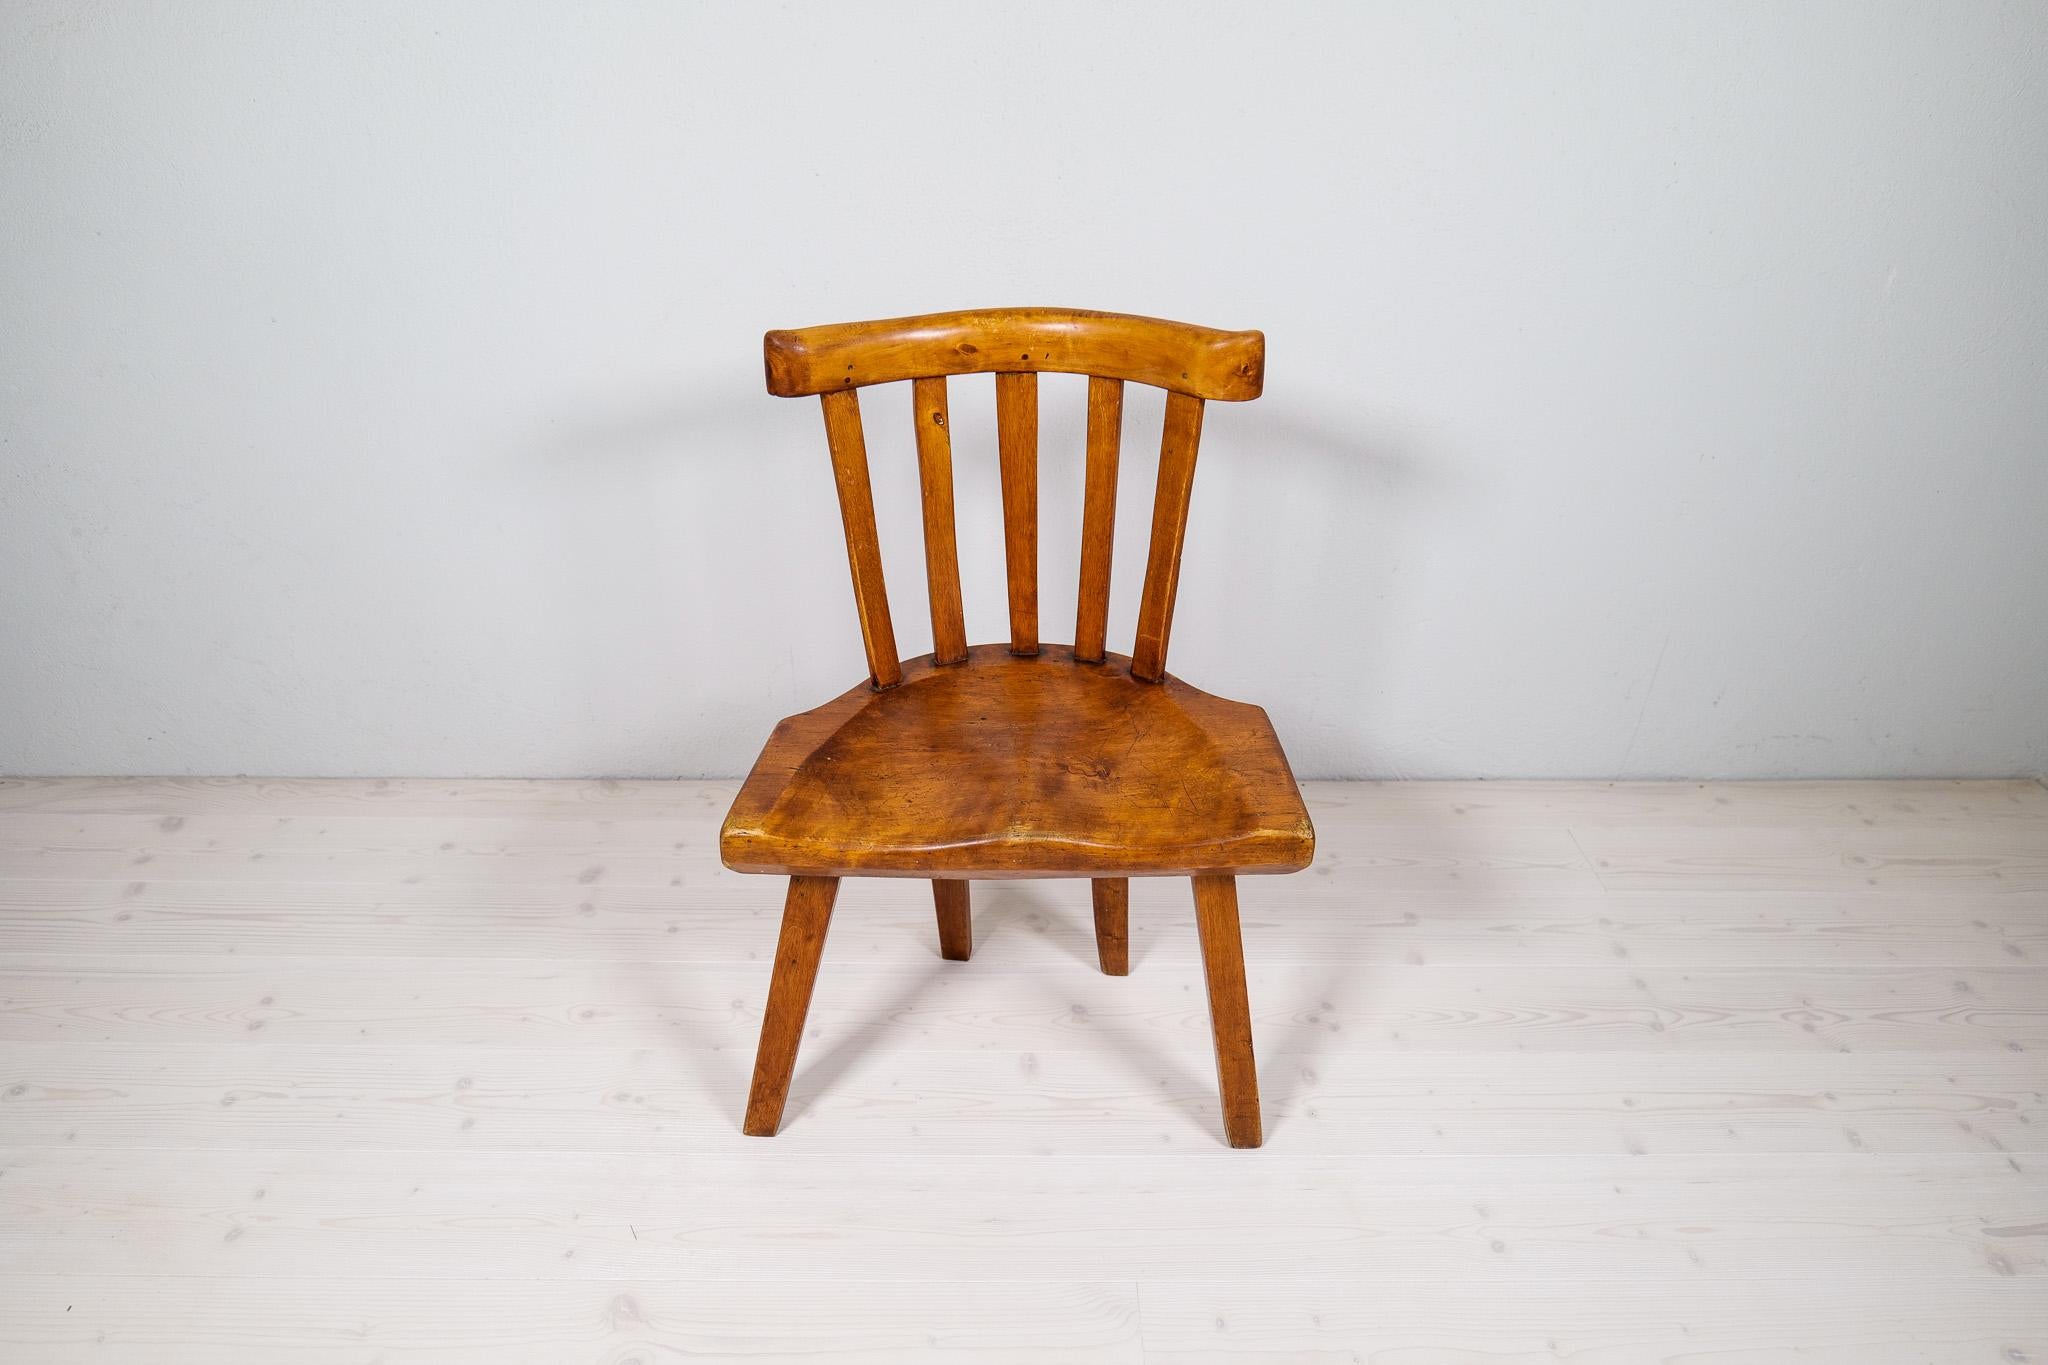 Birch 19th Century Swedish Folk Art Chair in Higly Decorative Shapes For Sale